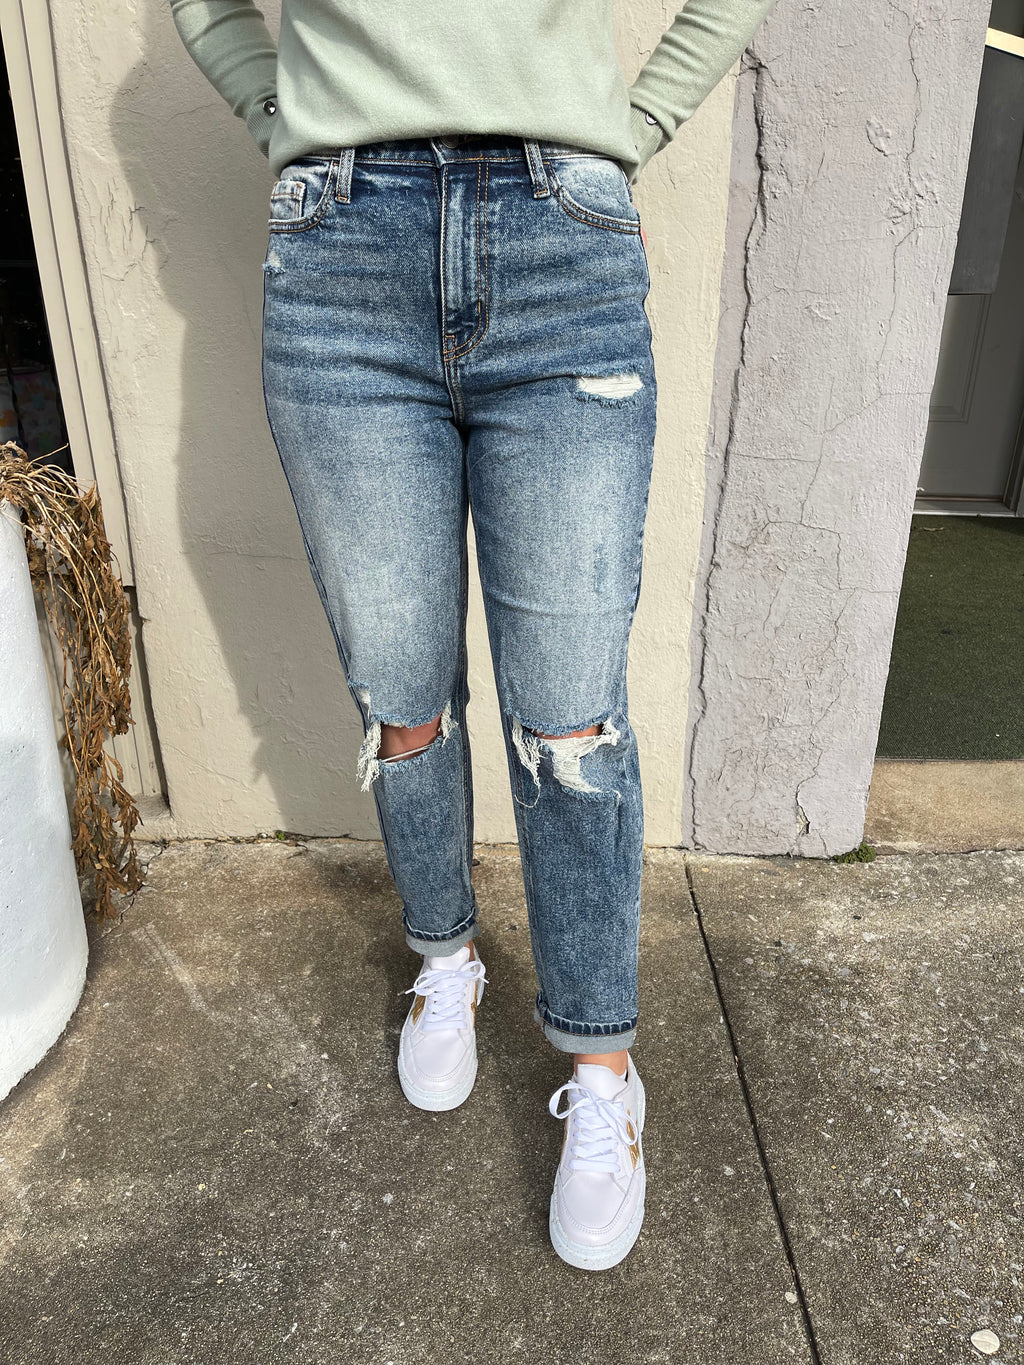 Fierce Mood Mom Jeans offer a modern take on the classic mom jean. Constructed with a durable dark denim wash, these jeans are designed with a high waist and distressed detailing, finished with a classic cuff hem. Enjoy the perfect balance of comfort, style and quality.